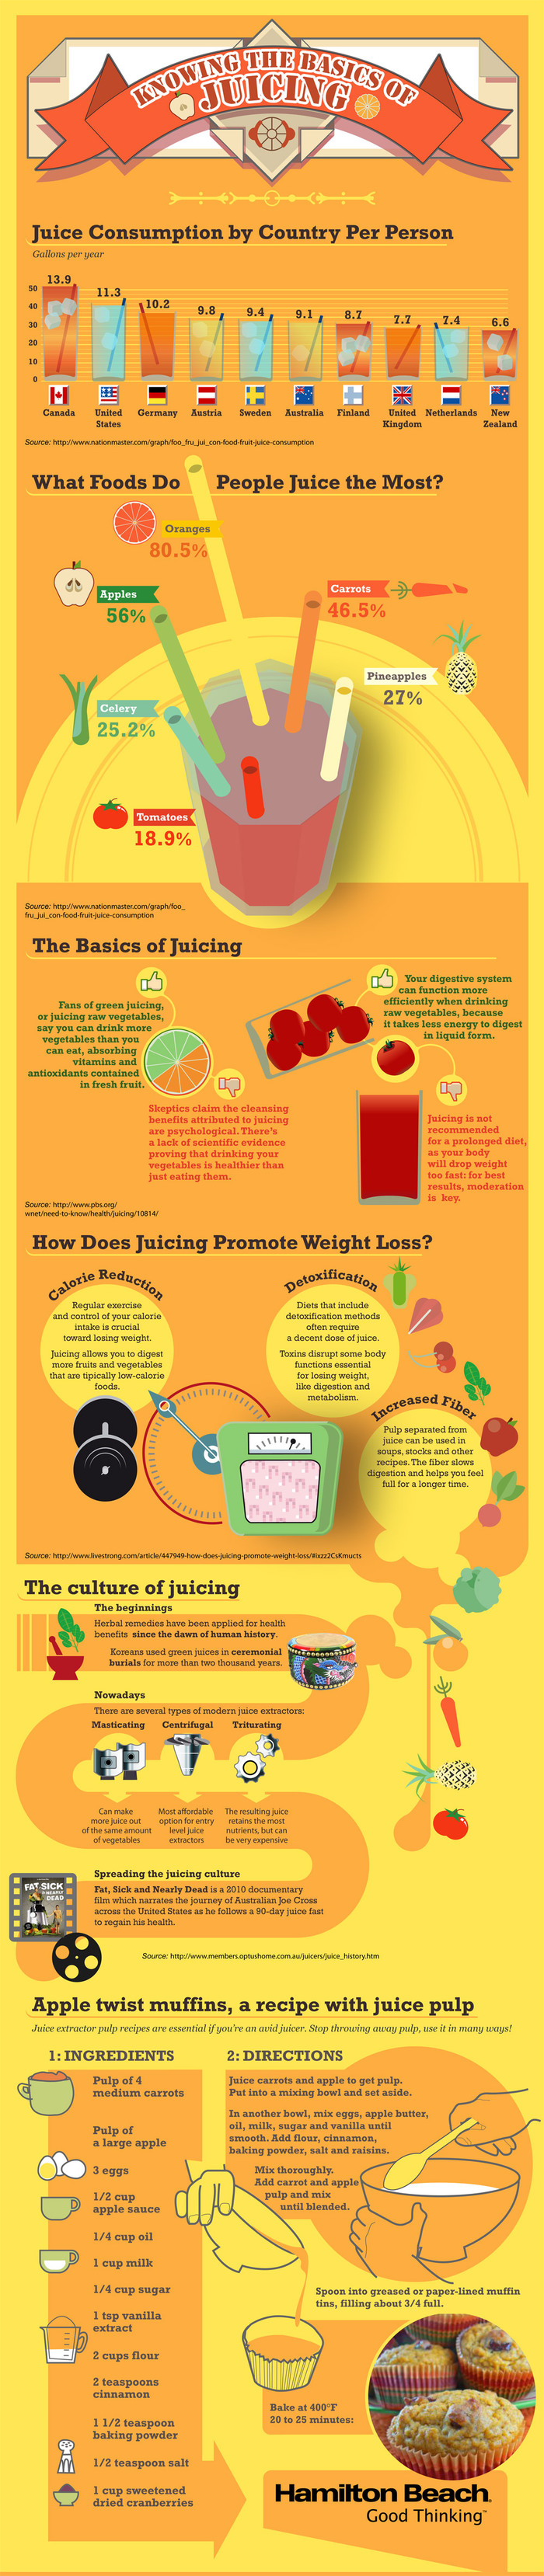 Knowing the Basics of Juicing